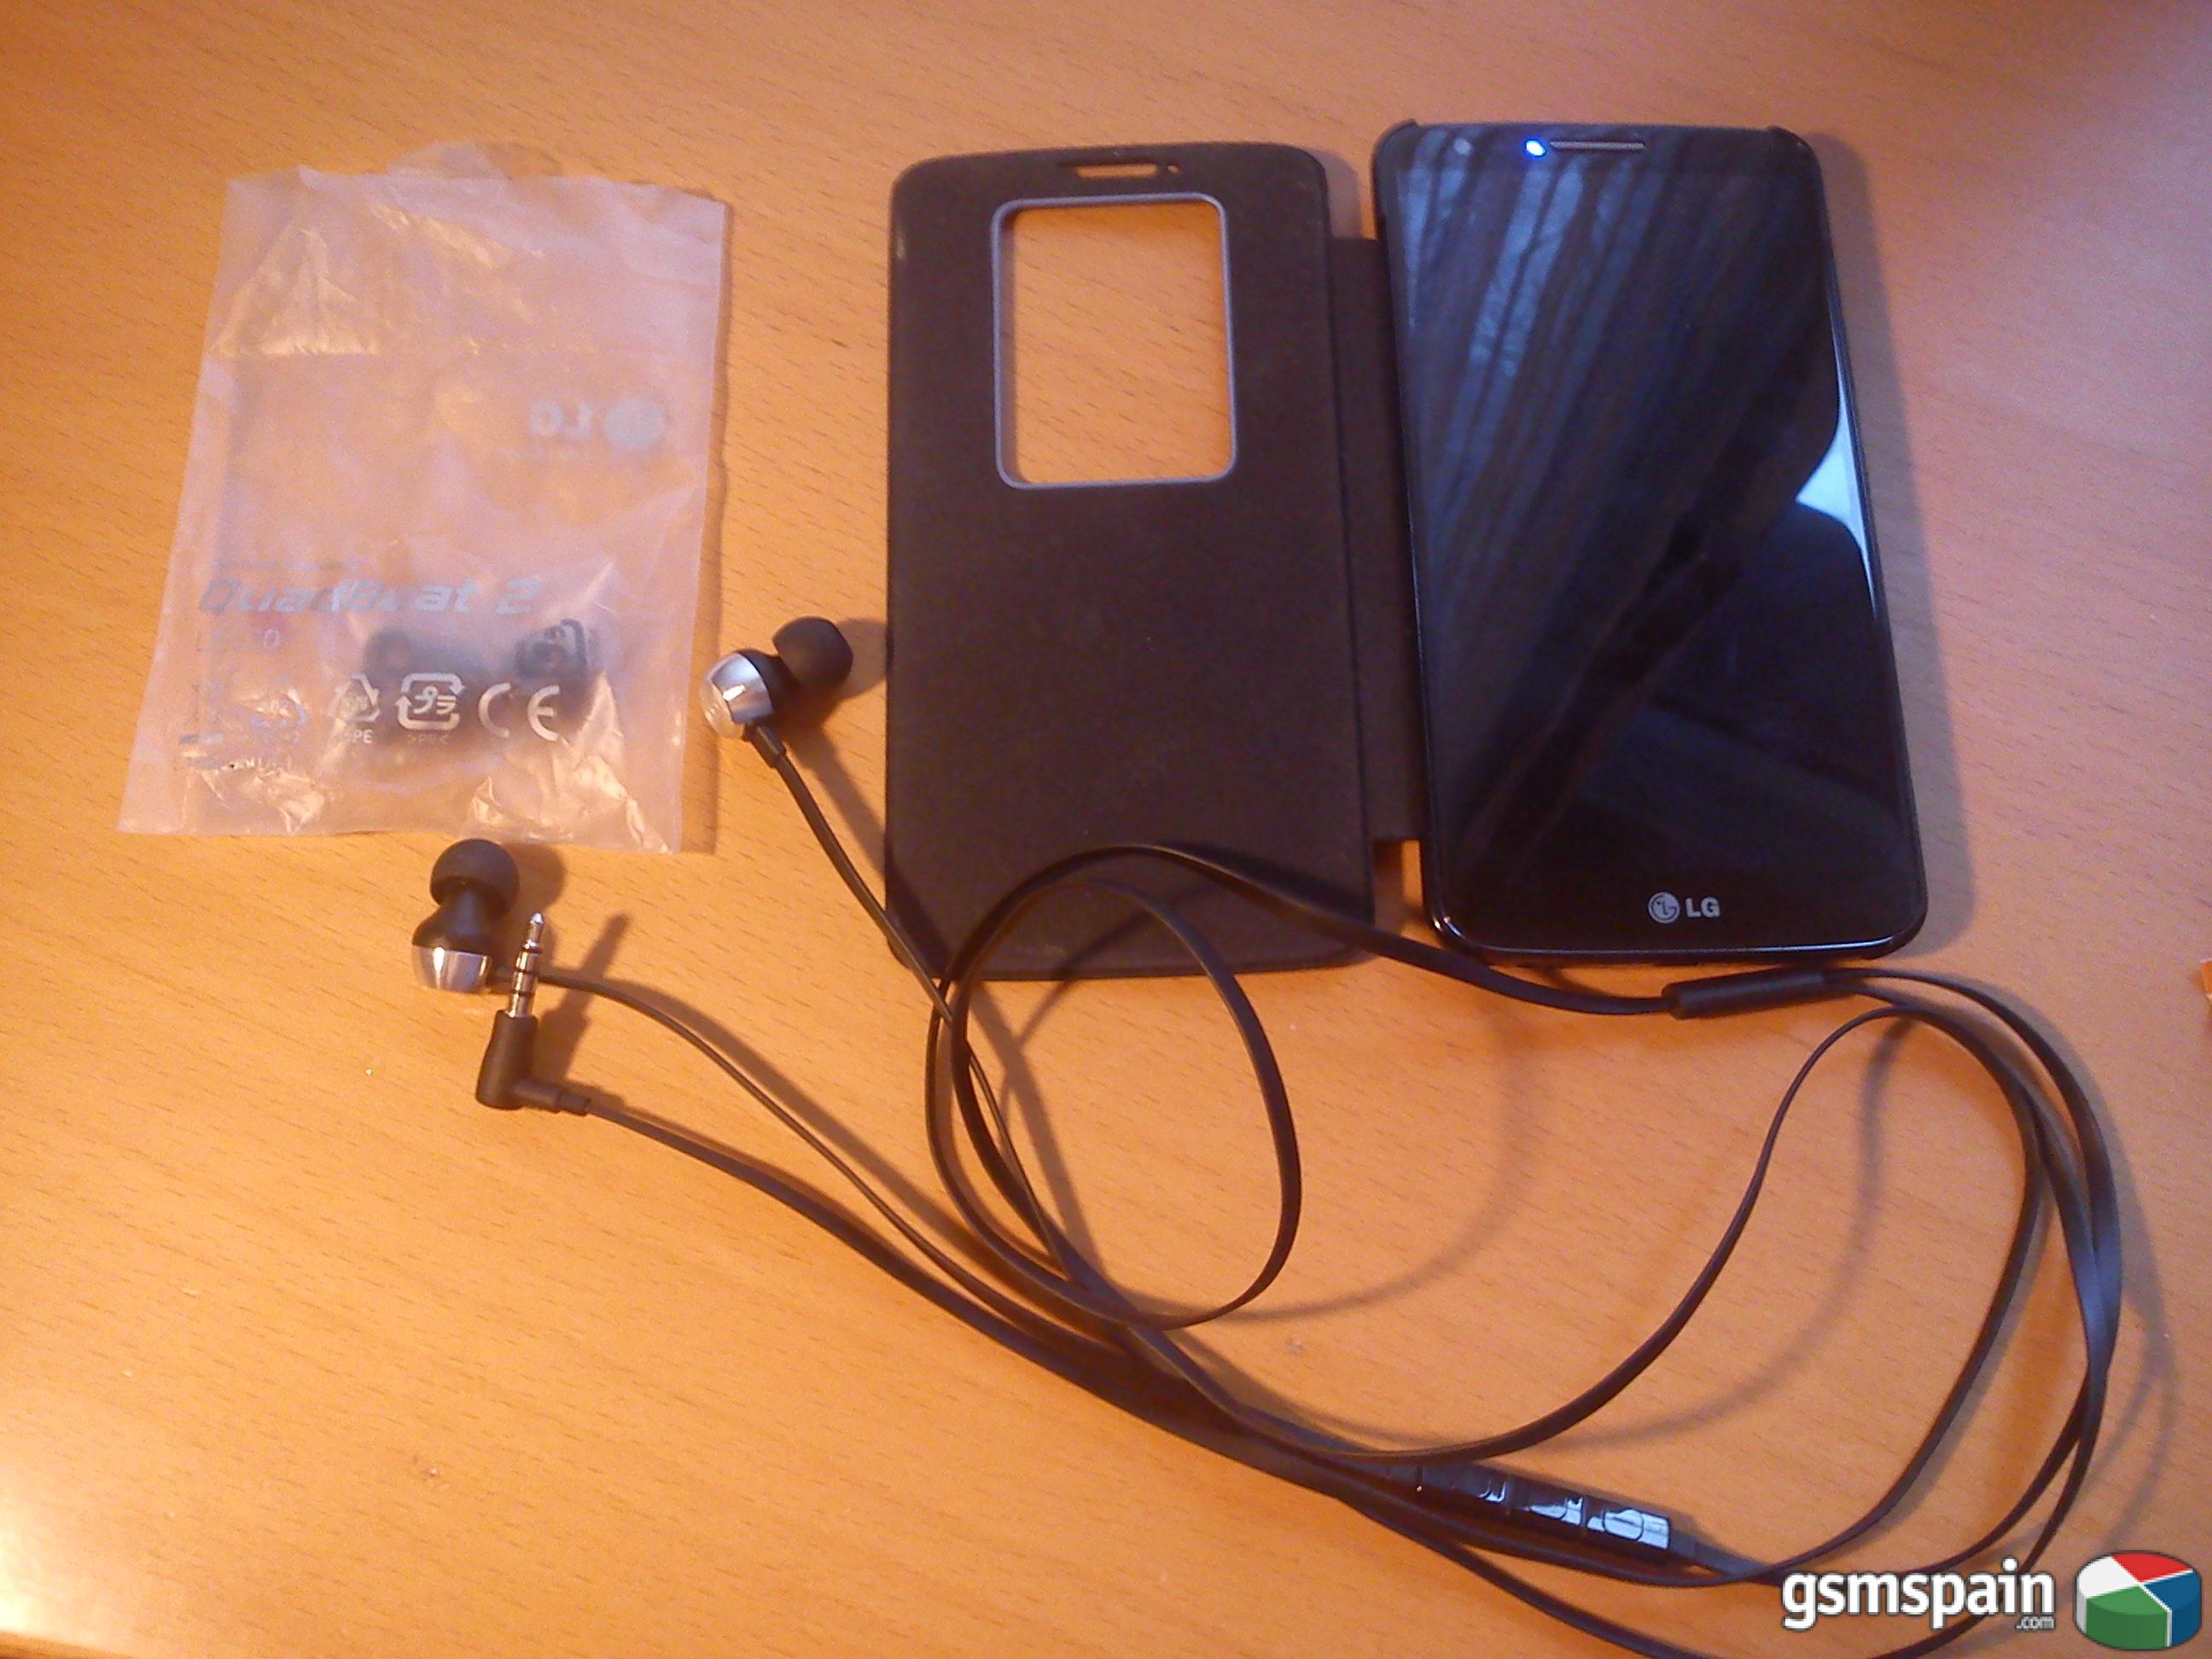 [CAMBIO] LG G2 32Gb Impecable